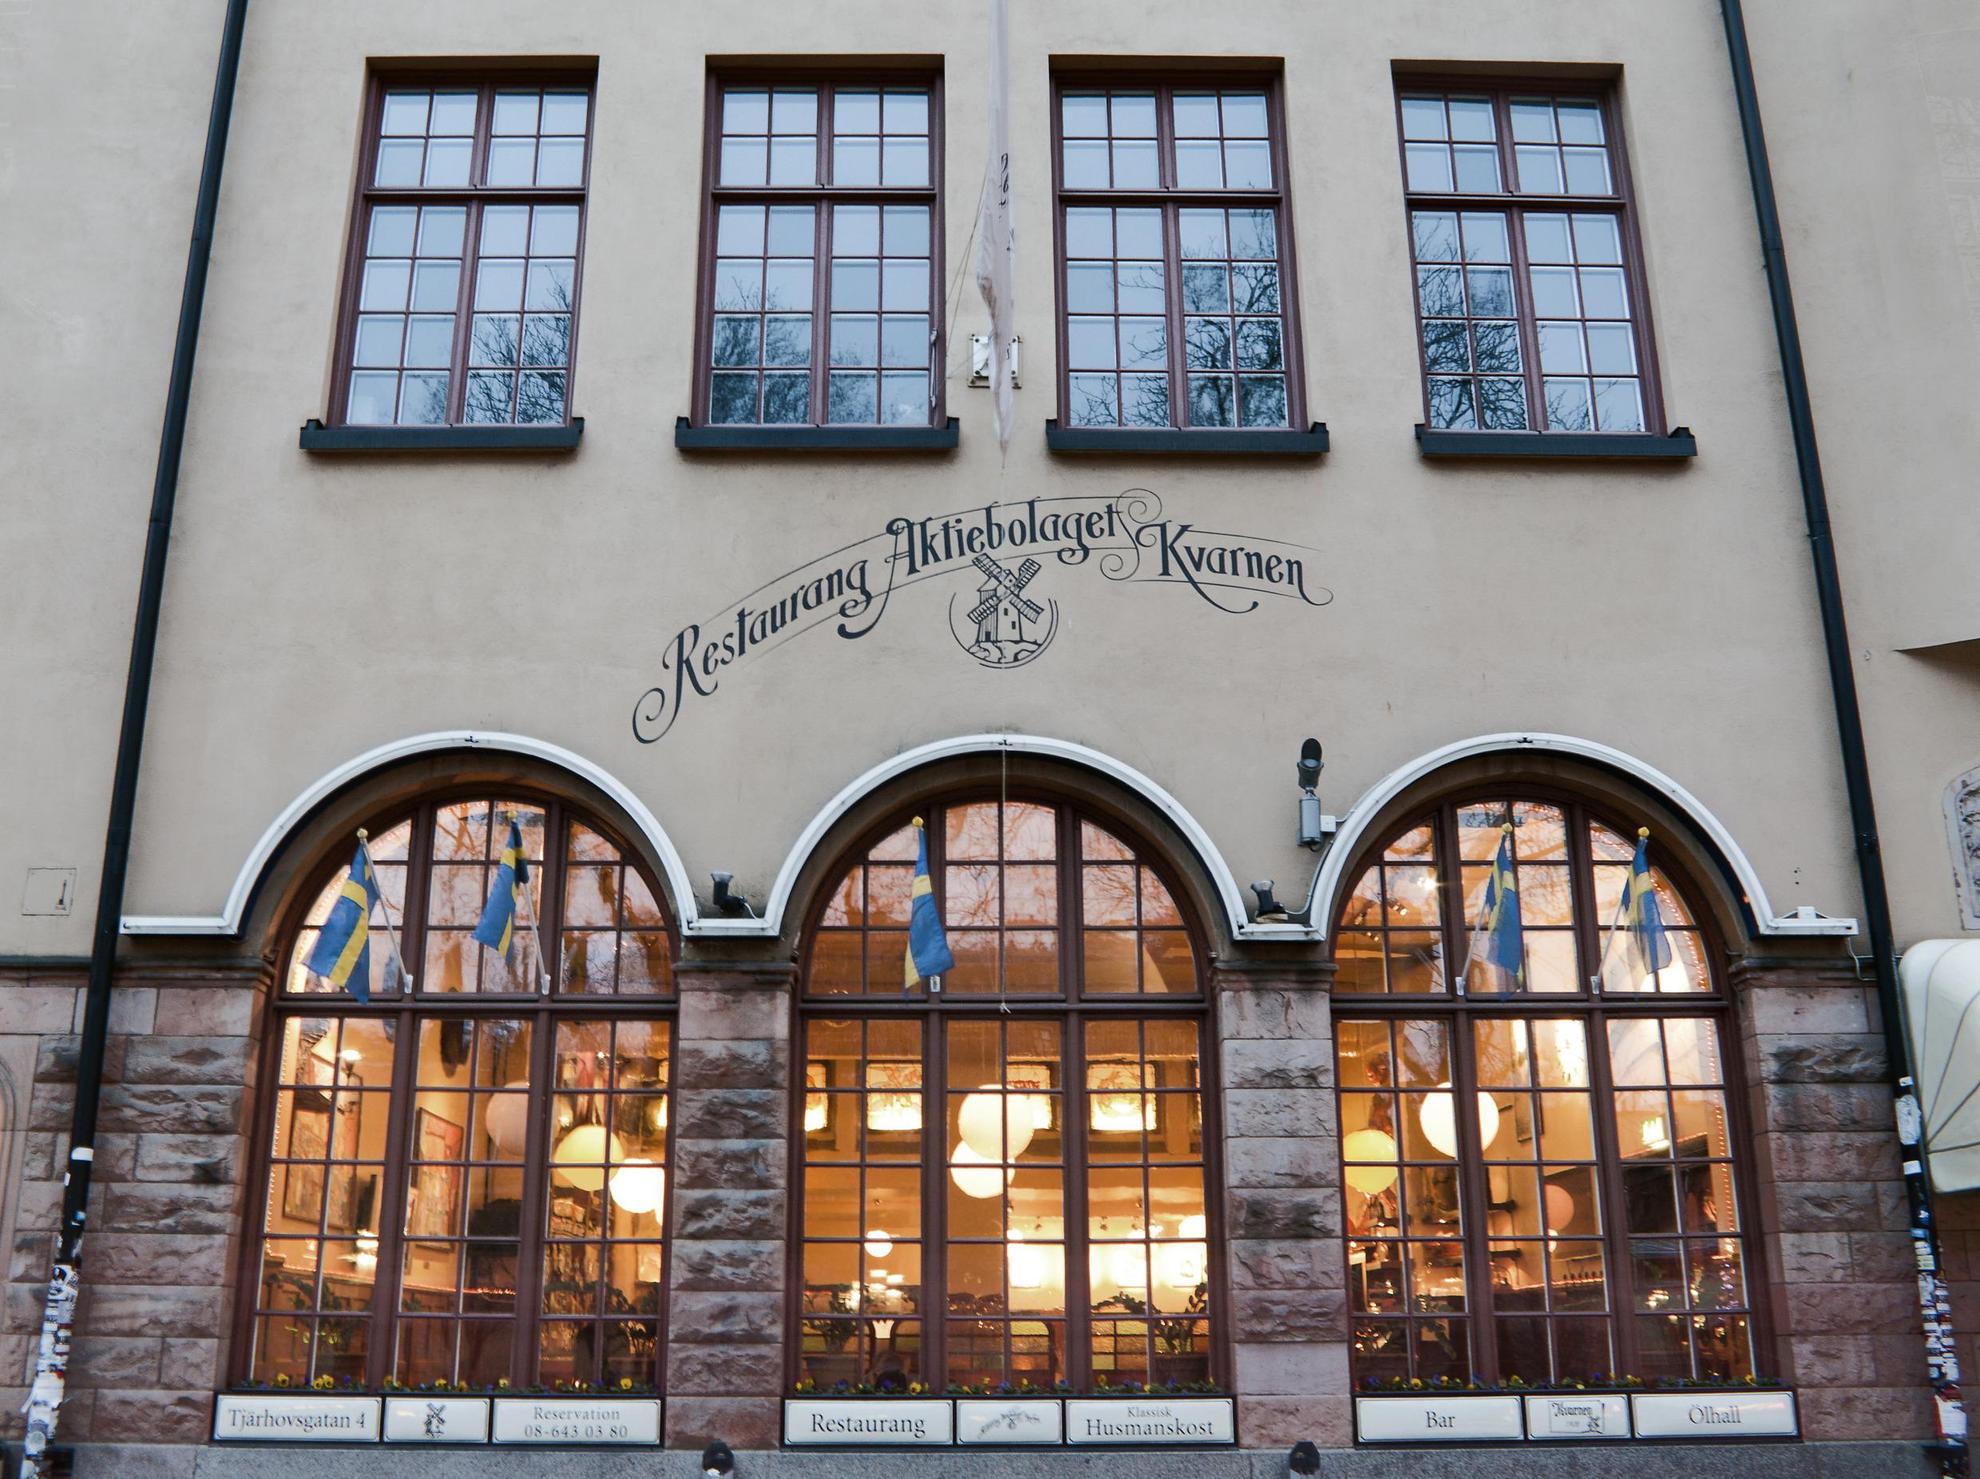 The exterior of the restaurant Kvarnen in Stockholm.